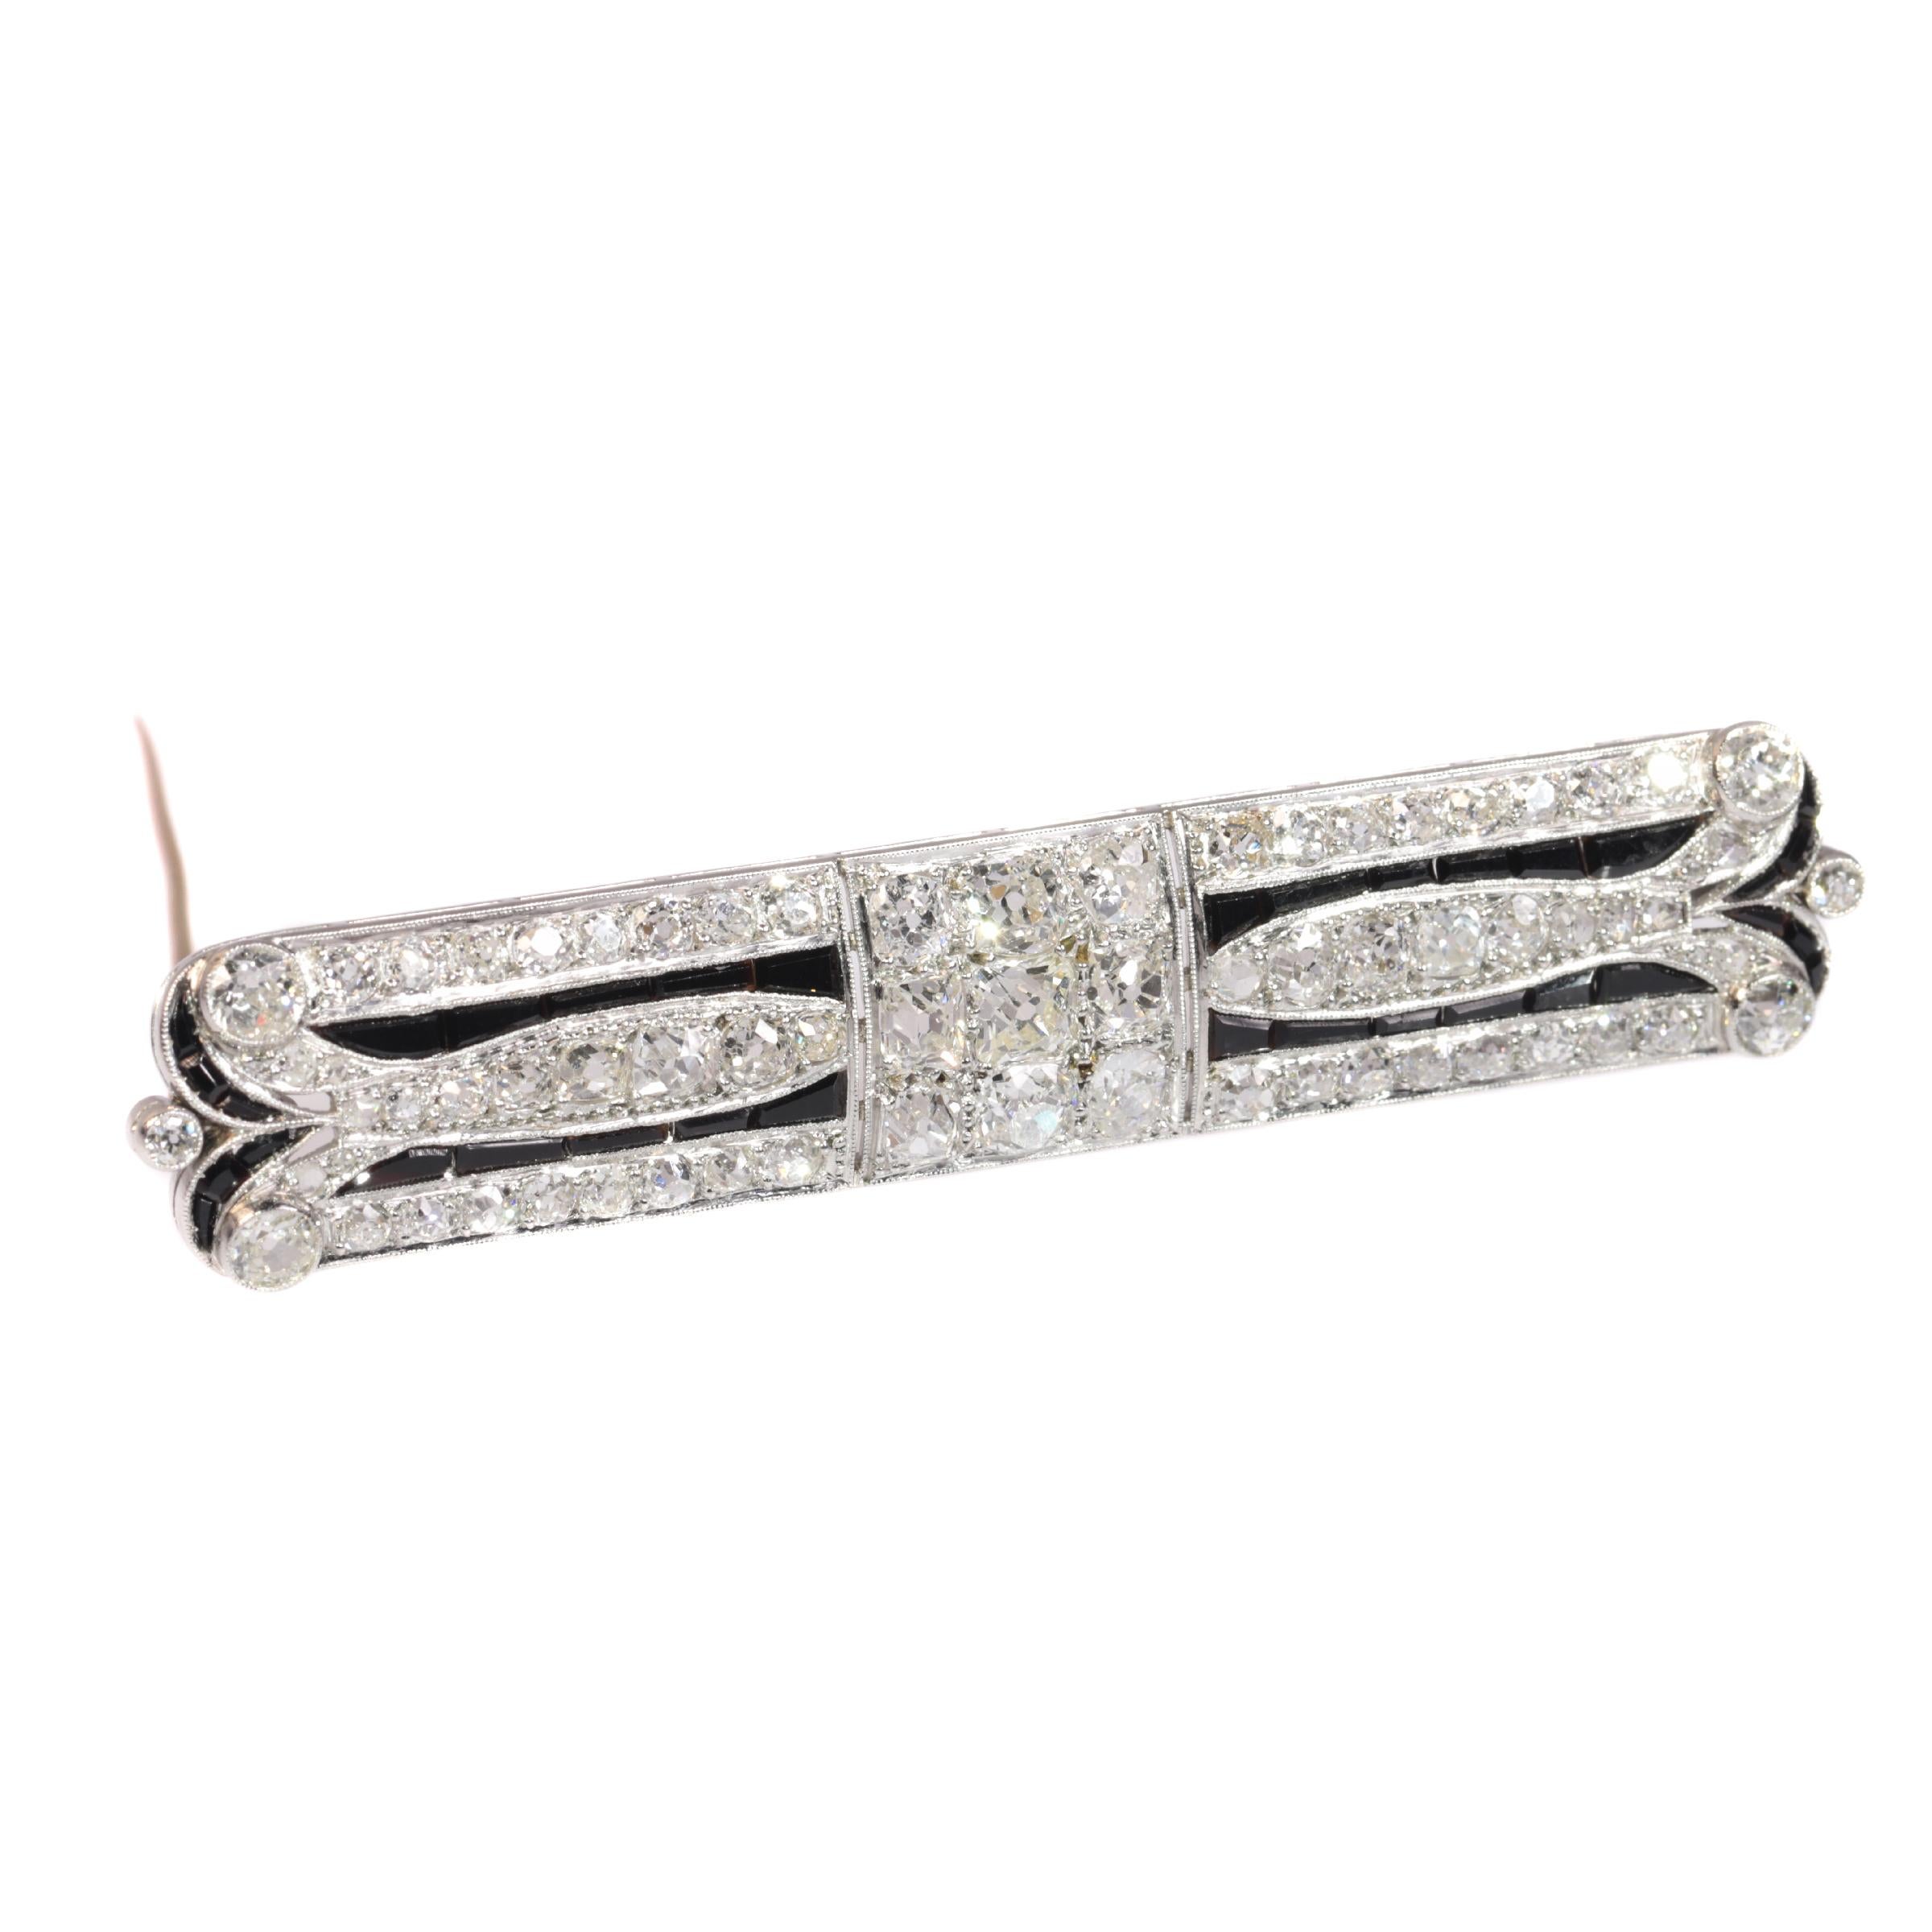 Women's or Men's Diamond Loaded Strong Stylish Platinum Art Deco Brooch with over 7 crts Diamonds For Sale